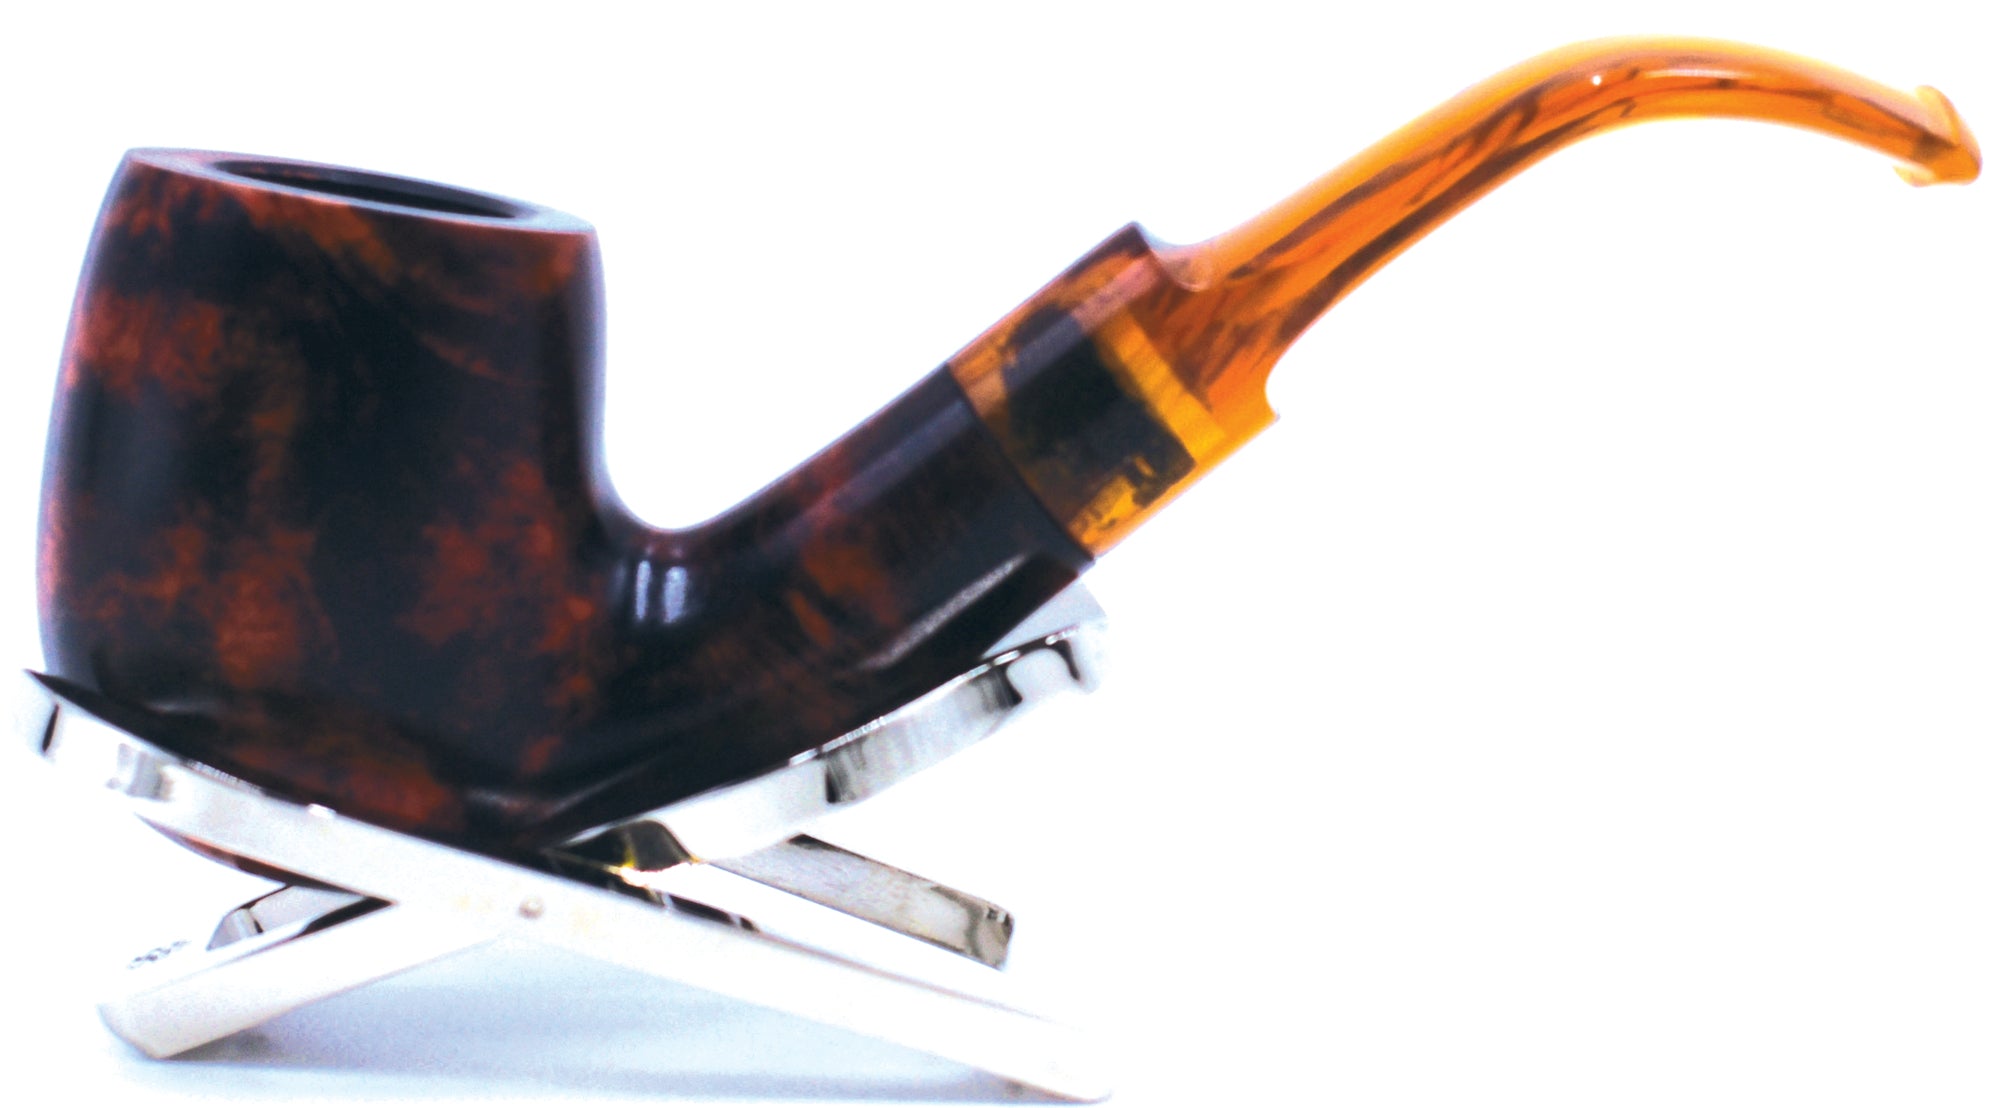 LEGENDEX® LASCALA* Plexiglass Mouthpiece 9 MM Filtered Briar Smoking Pipe Made In Italy 01-08-704